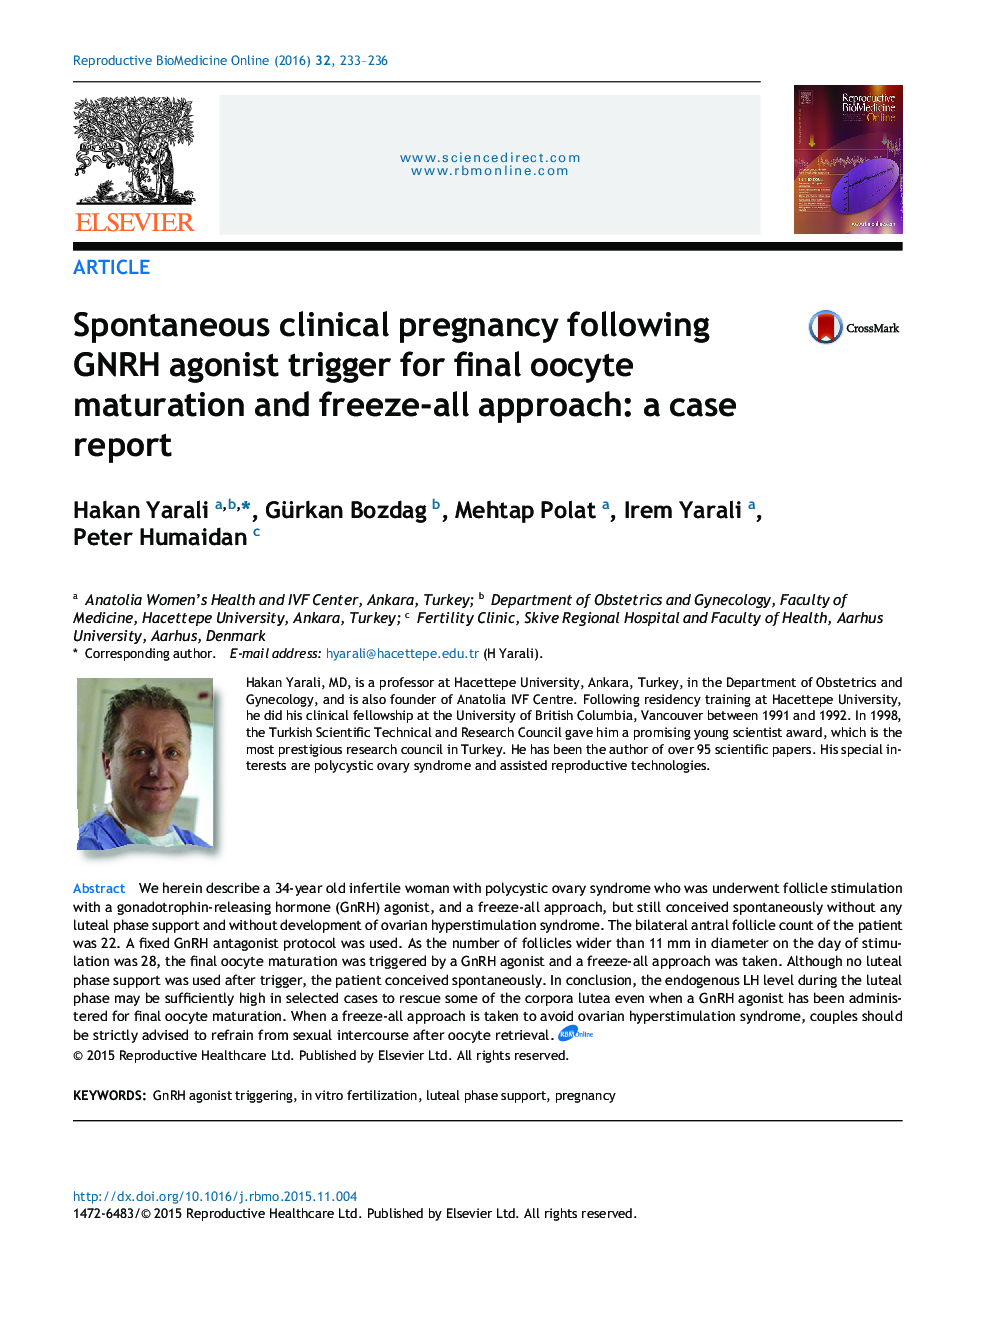 Spontaneous clinical pregnancy following GNRH agonist trigger for final oocyte maturation and freeze-all approach: a case report